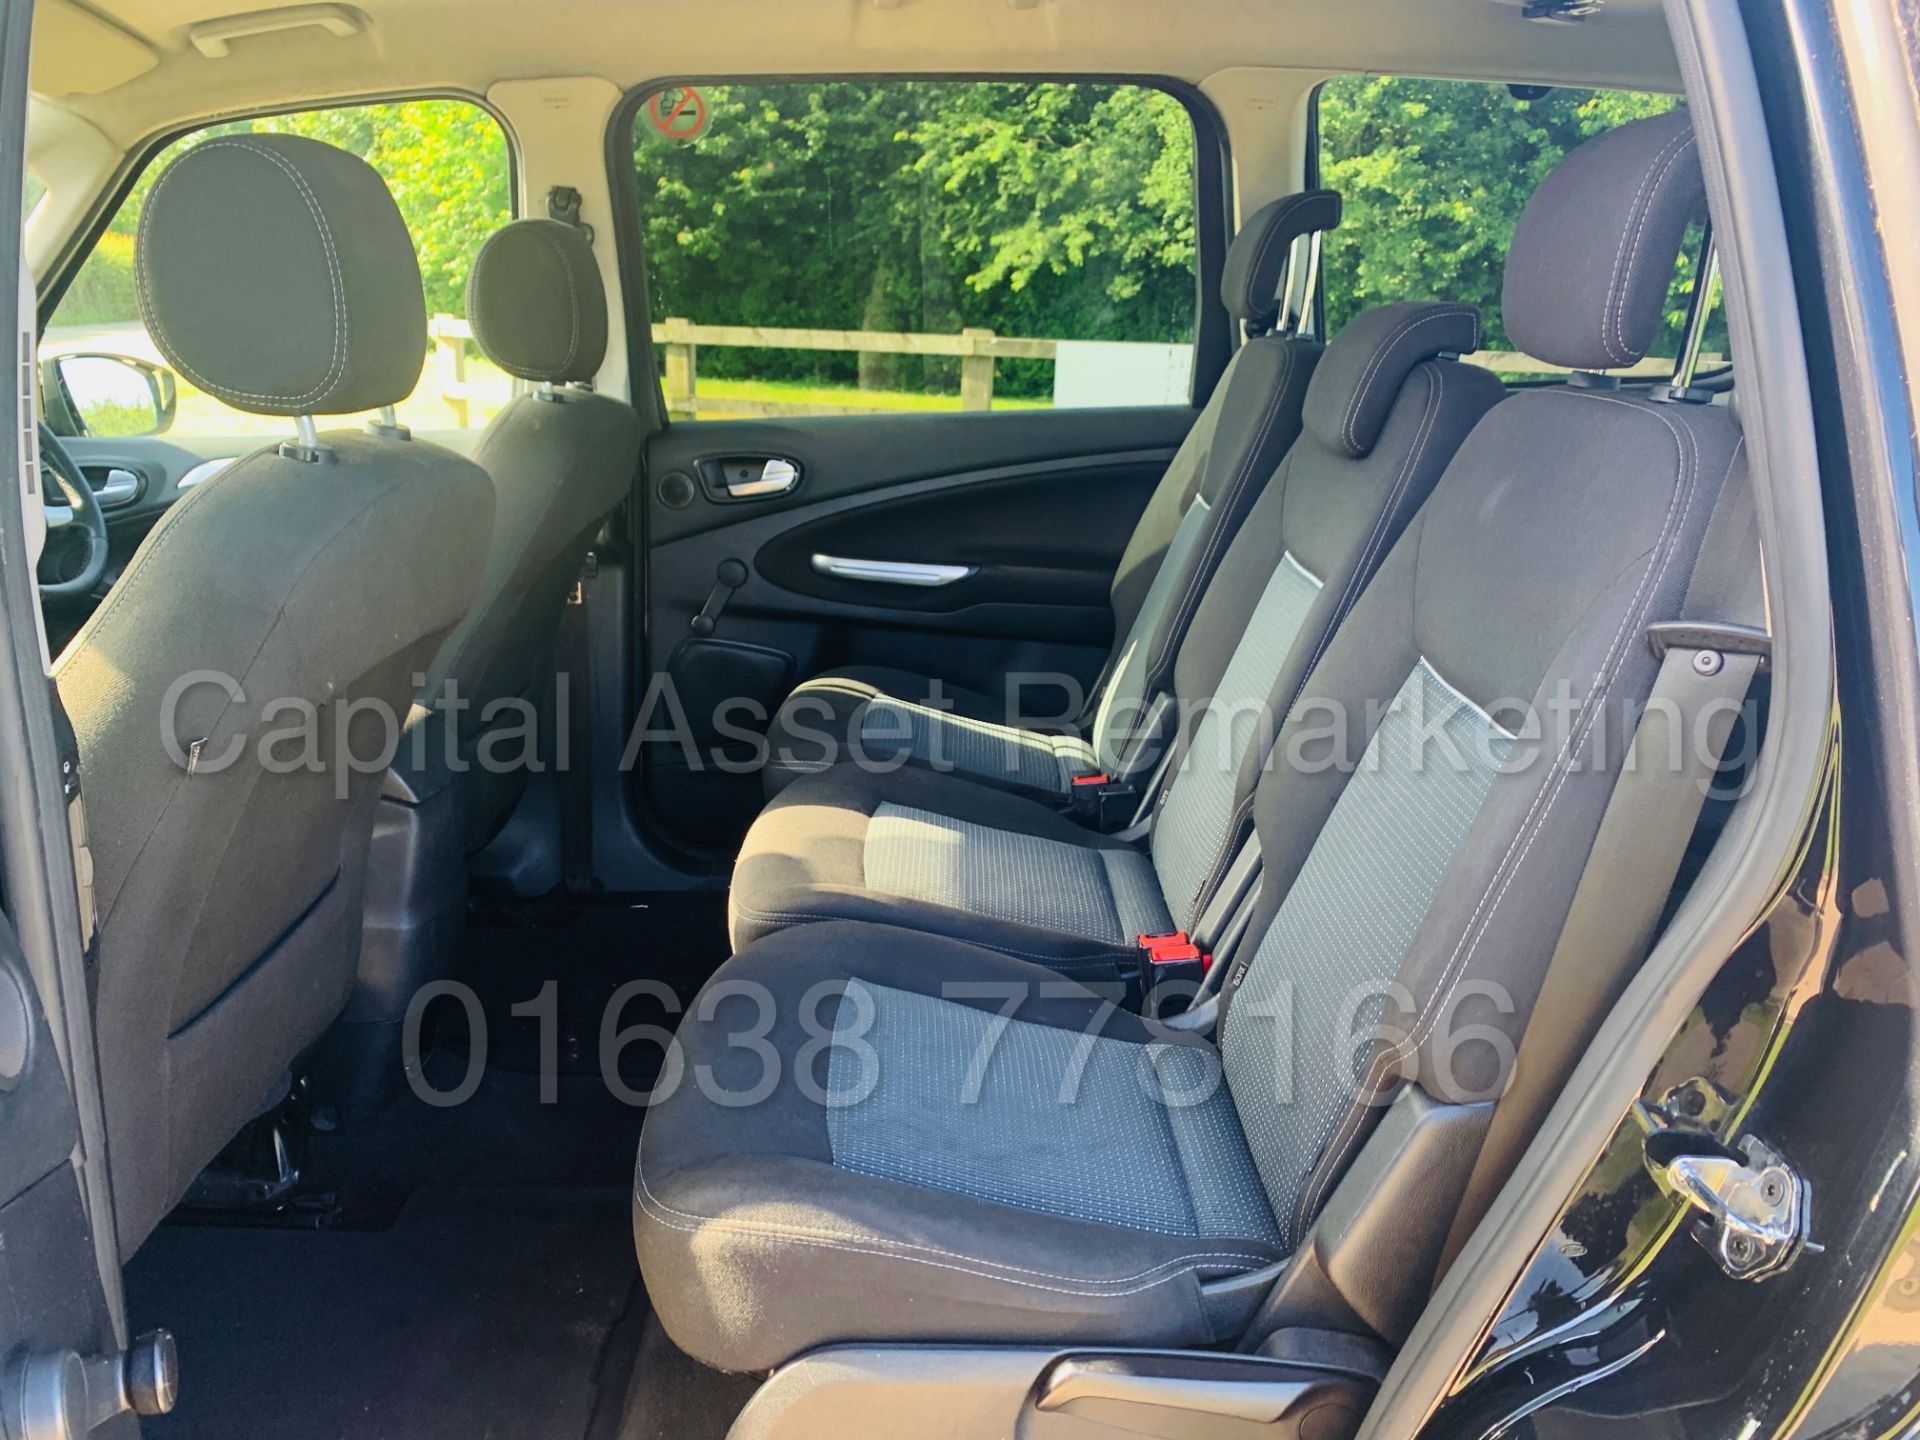 (ON SALE) FORD GALAXY *ZETEC* 7 SEATER MPV (2013) '2.0 TDCI - POWER SHIFT' (NO VAT - SAVE 20%) - Image 14 of 31